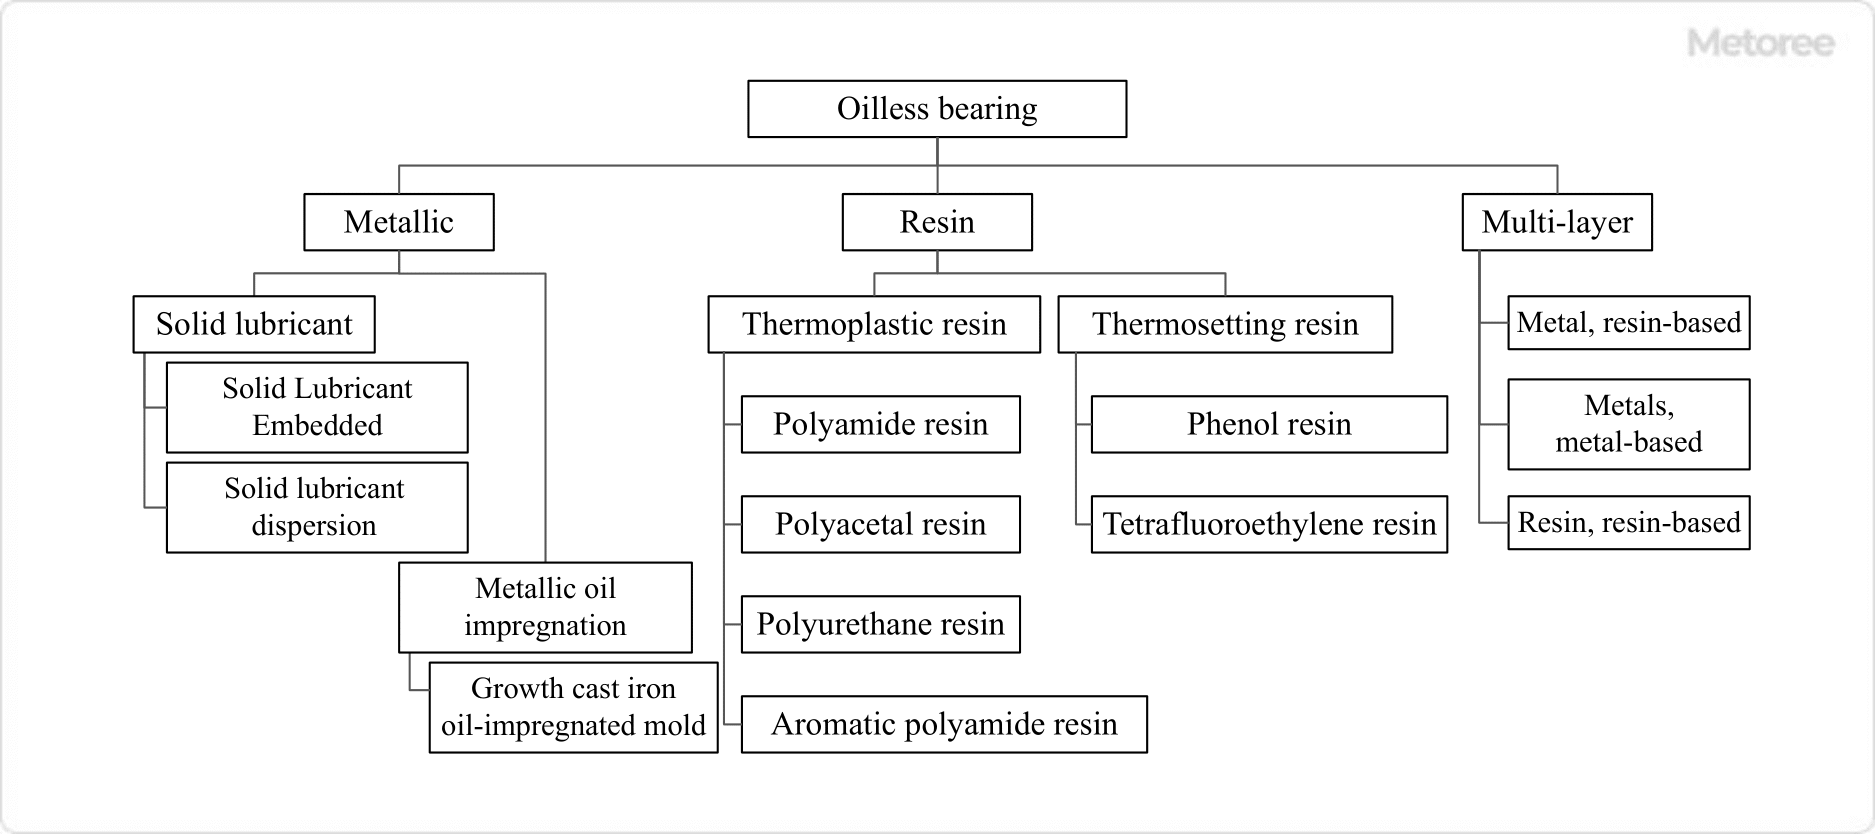 Figure 2. Types by material